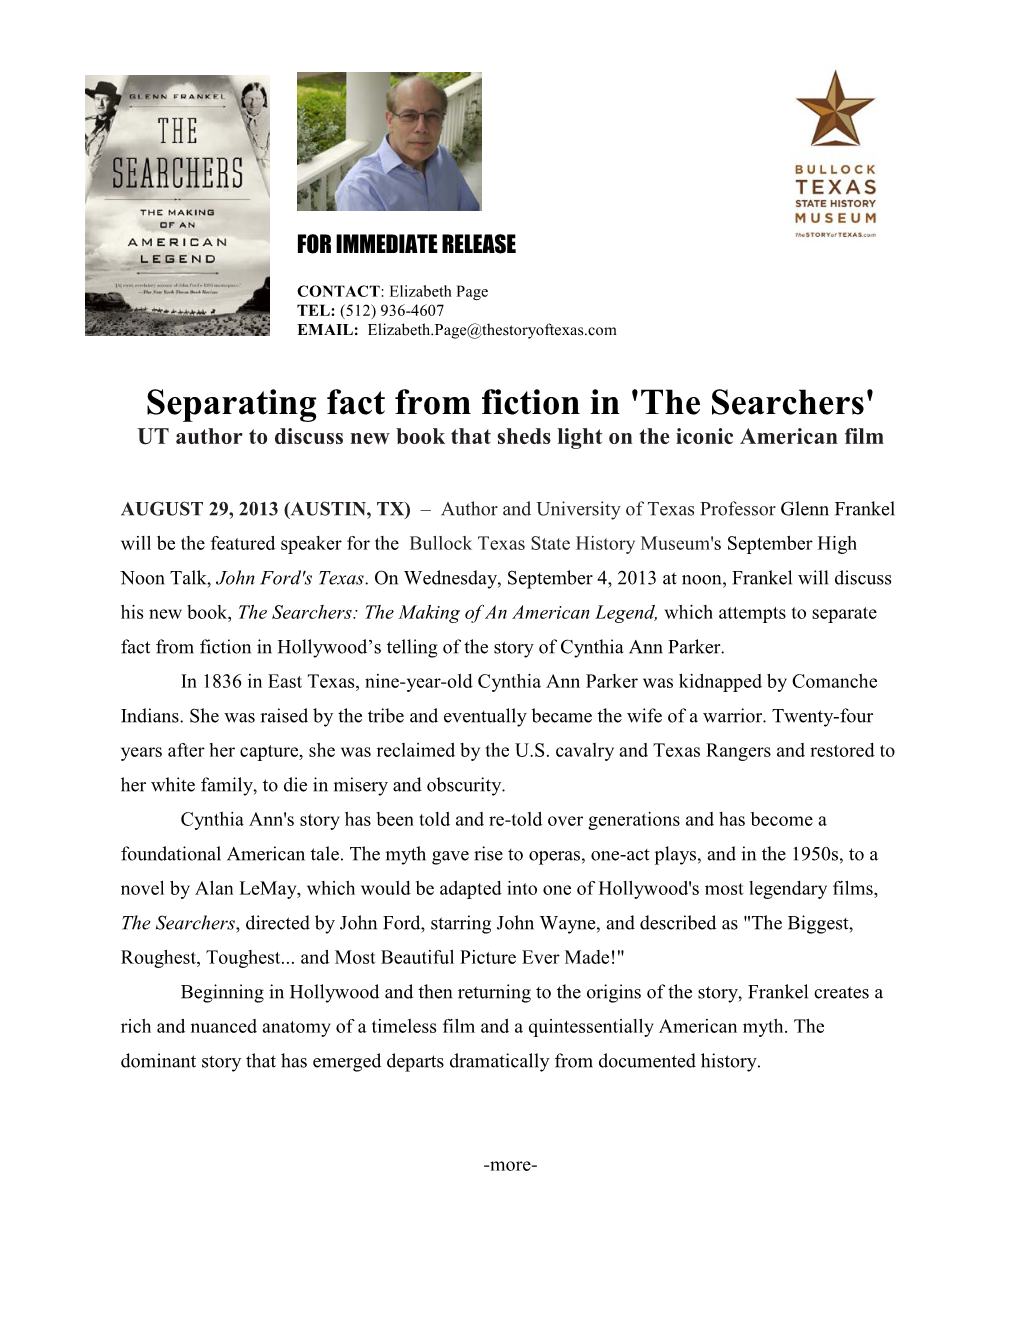 Separating Fact from Fiction in 'The Searchers' UT Author to Discuss New Book That Sheds Light on the Iconic American Film